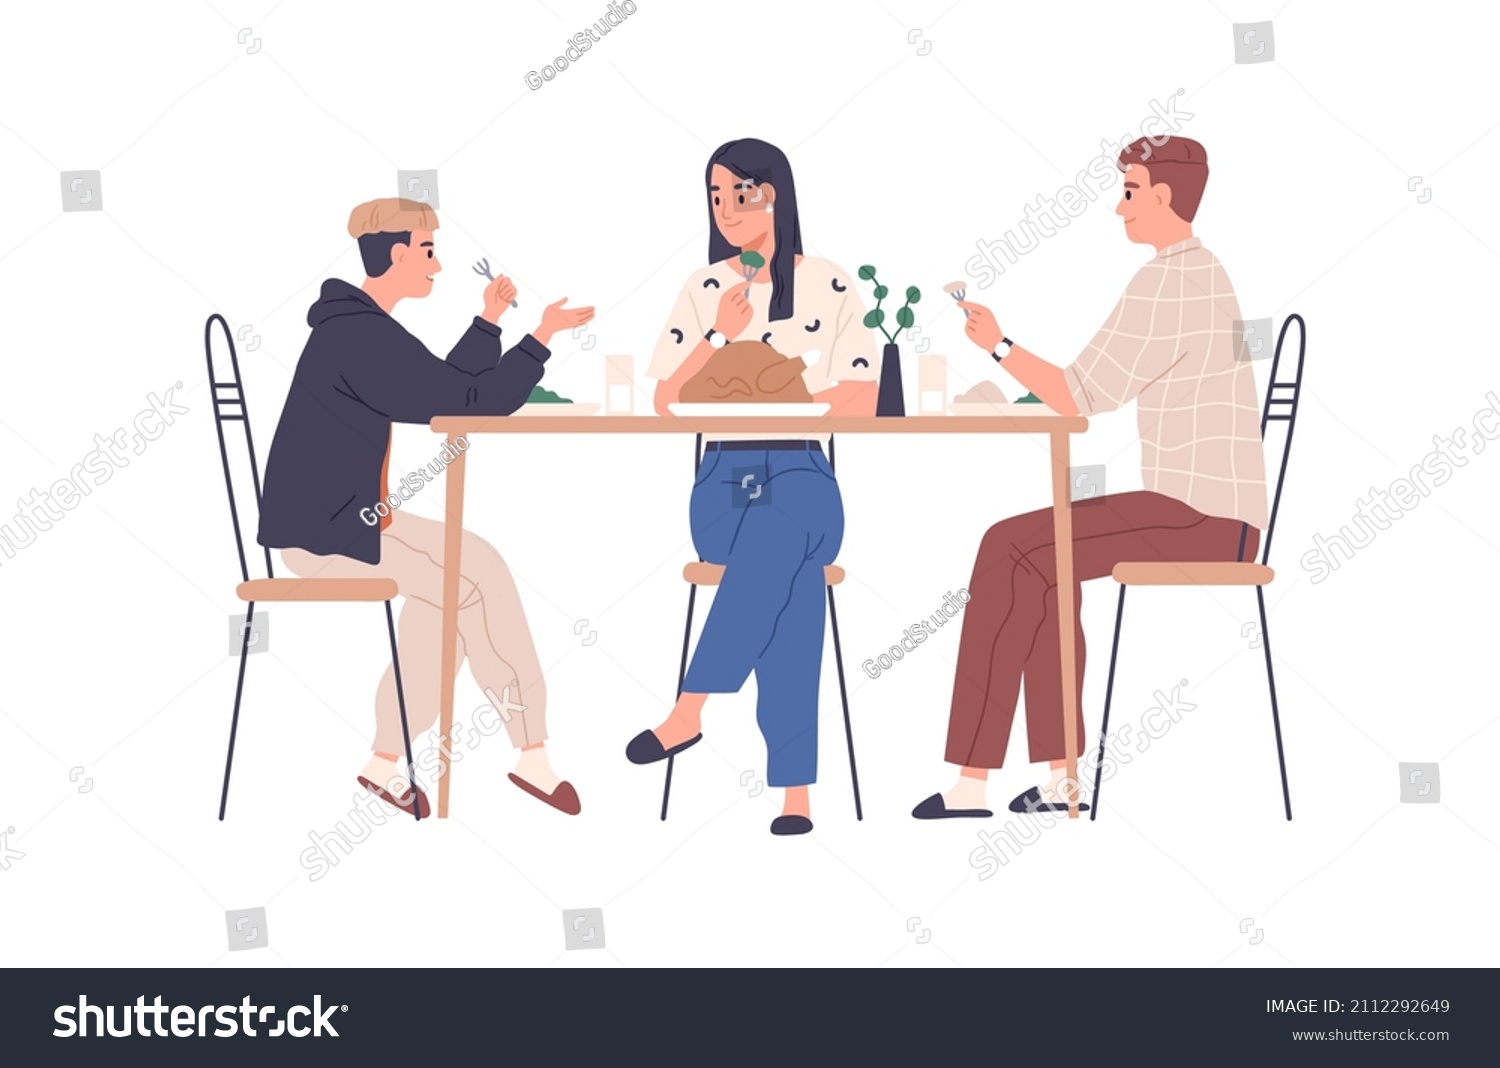 Parents and son teenager at family dinner, eating and talking at dining table. Happy mother, father and teen boy having meal together at home. Flat vector illustration isolated on white background #2112292649